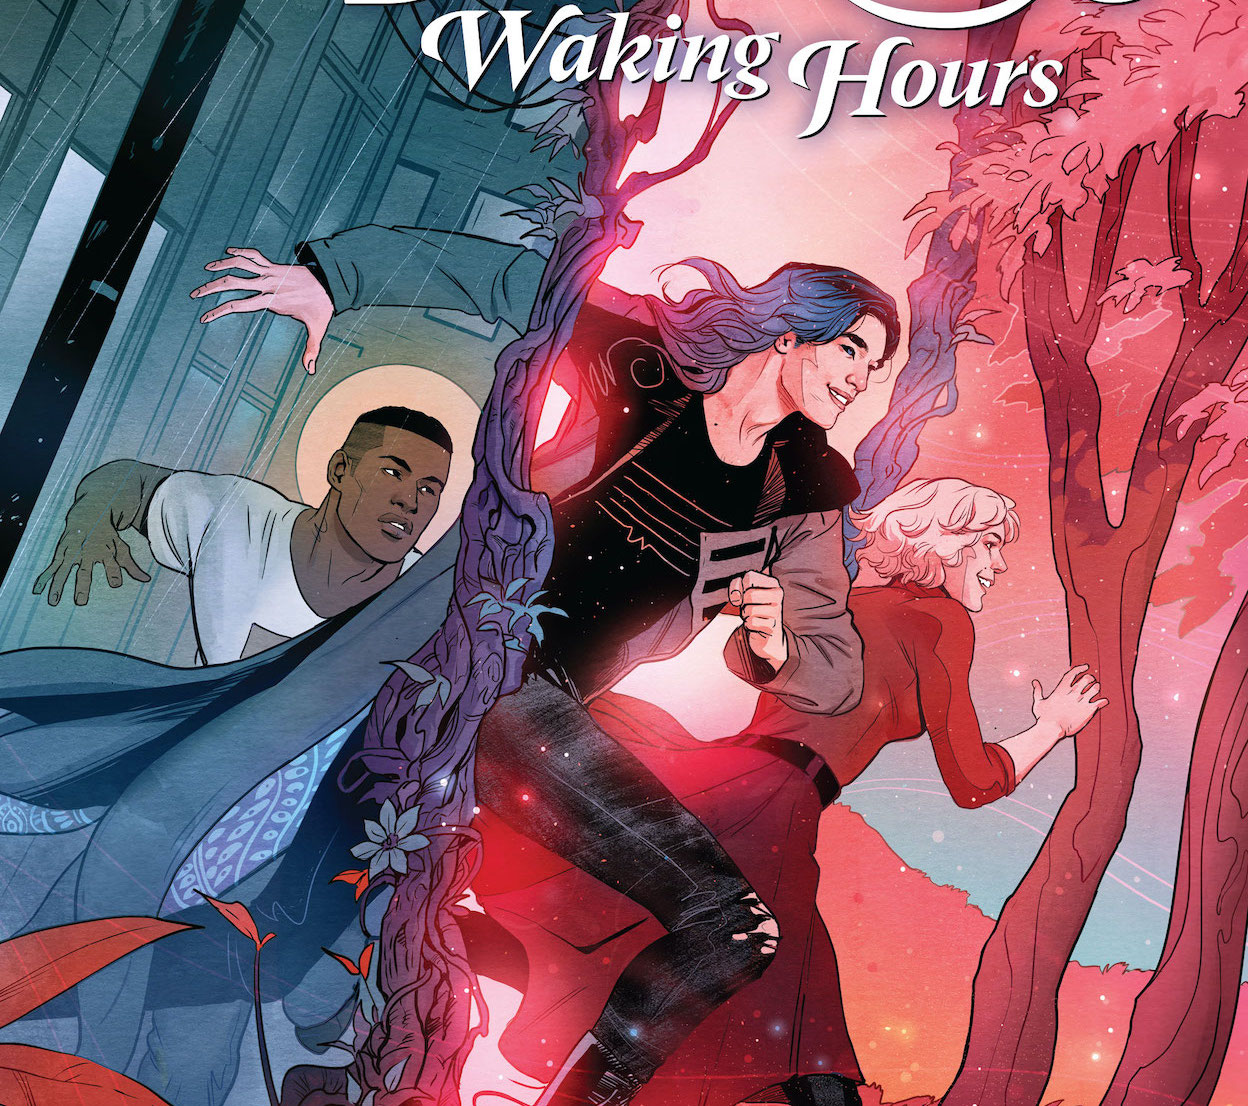 'The Dreaming: Waking Hours' #8 takes a field trip to Fairie